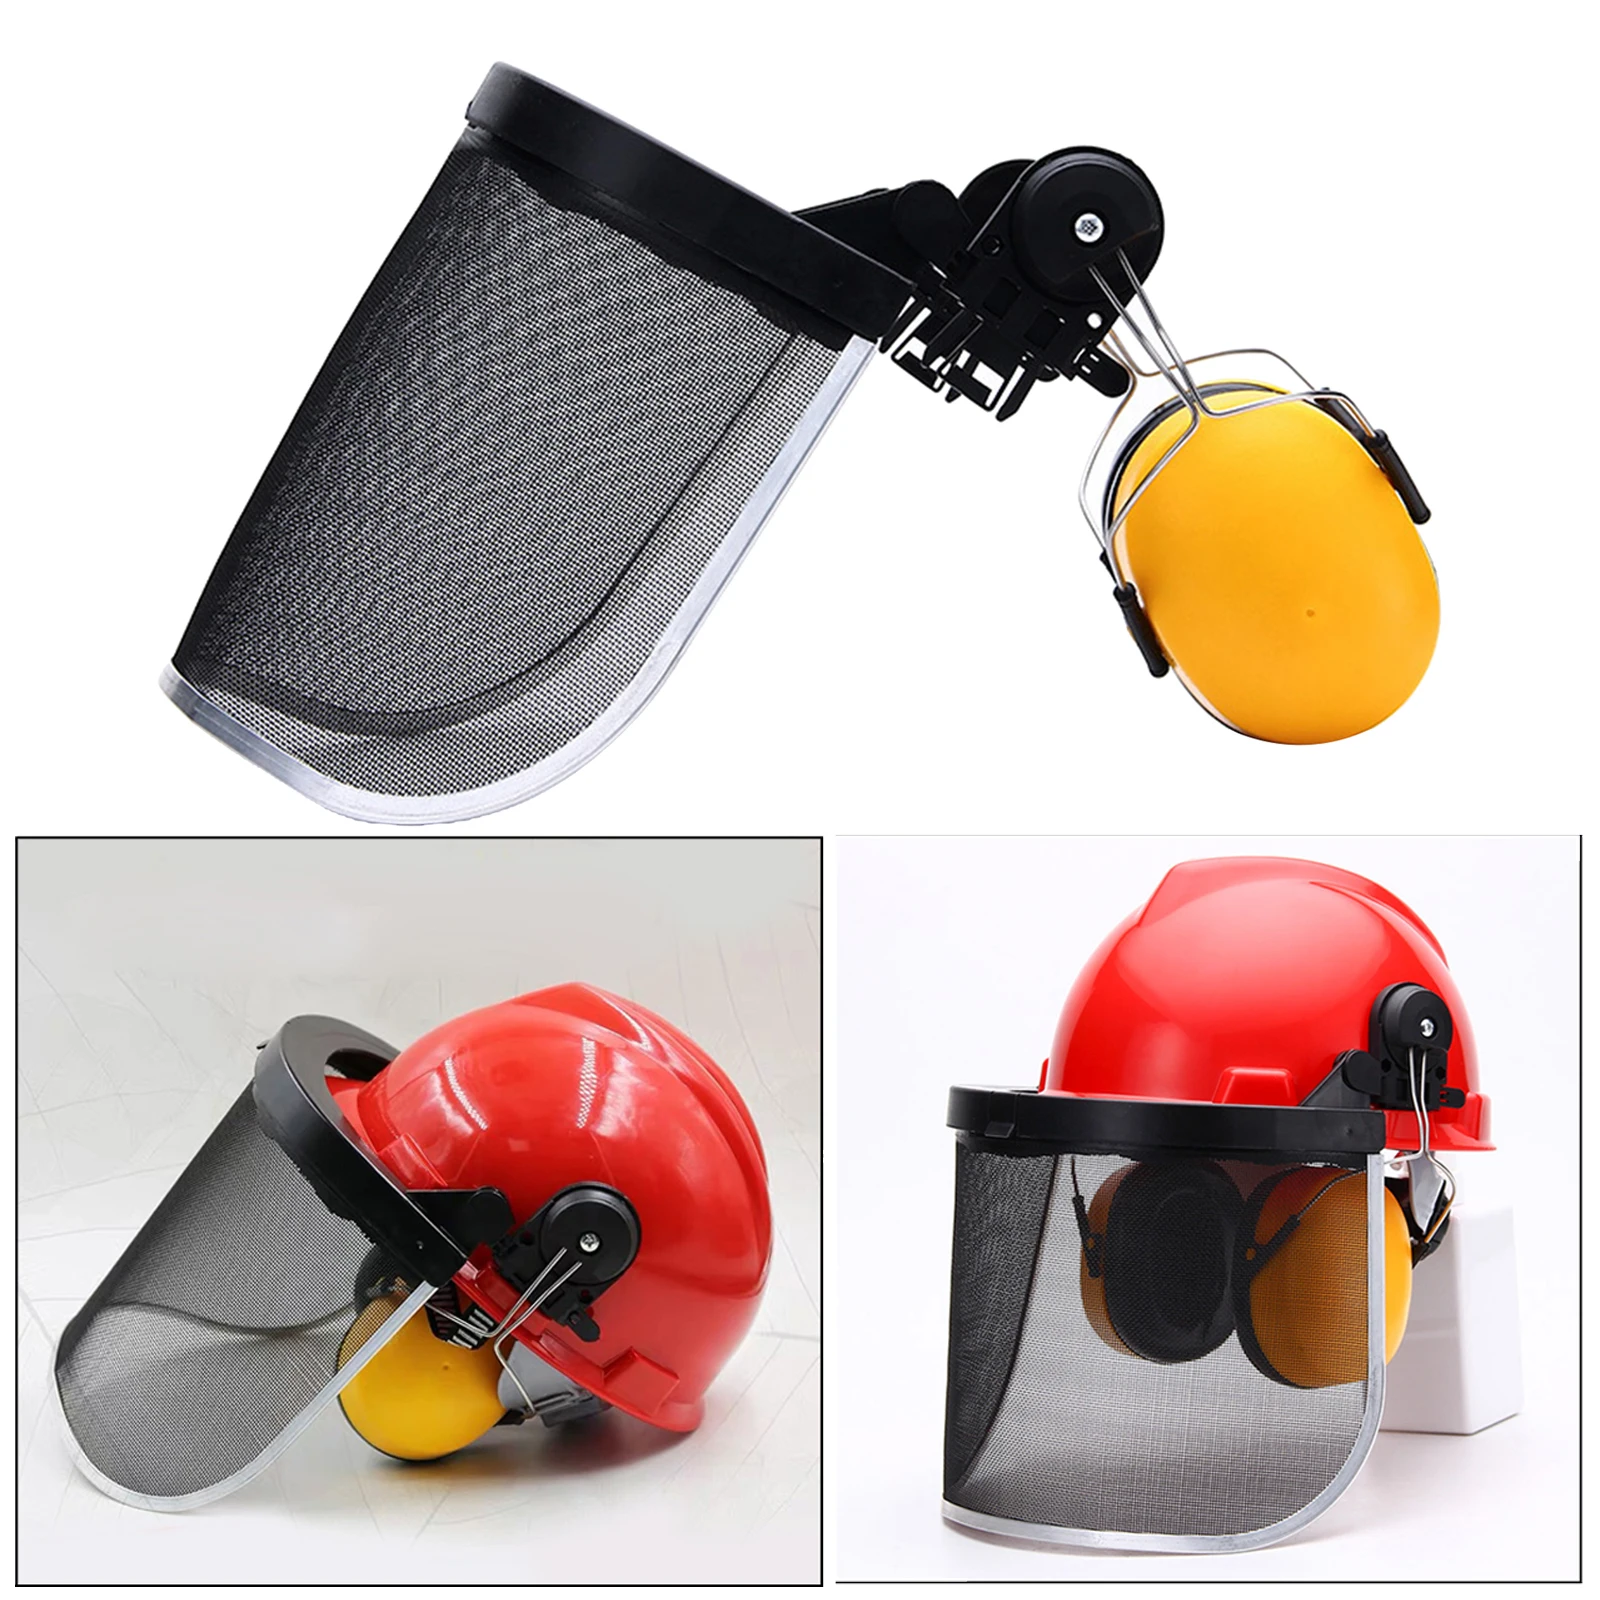 Industrial Forestry Ear Muffs and Protective Visors for Safety Helmet, Wire Mesh Mask Heavy Duty Hard Hat Chainsaw Helmet Parts